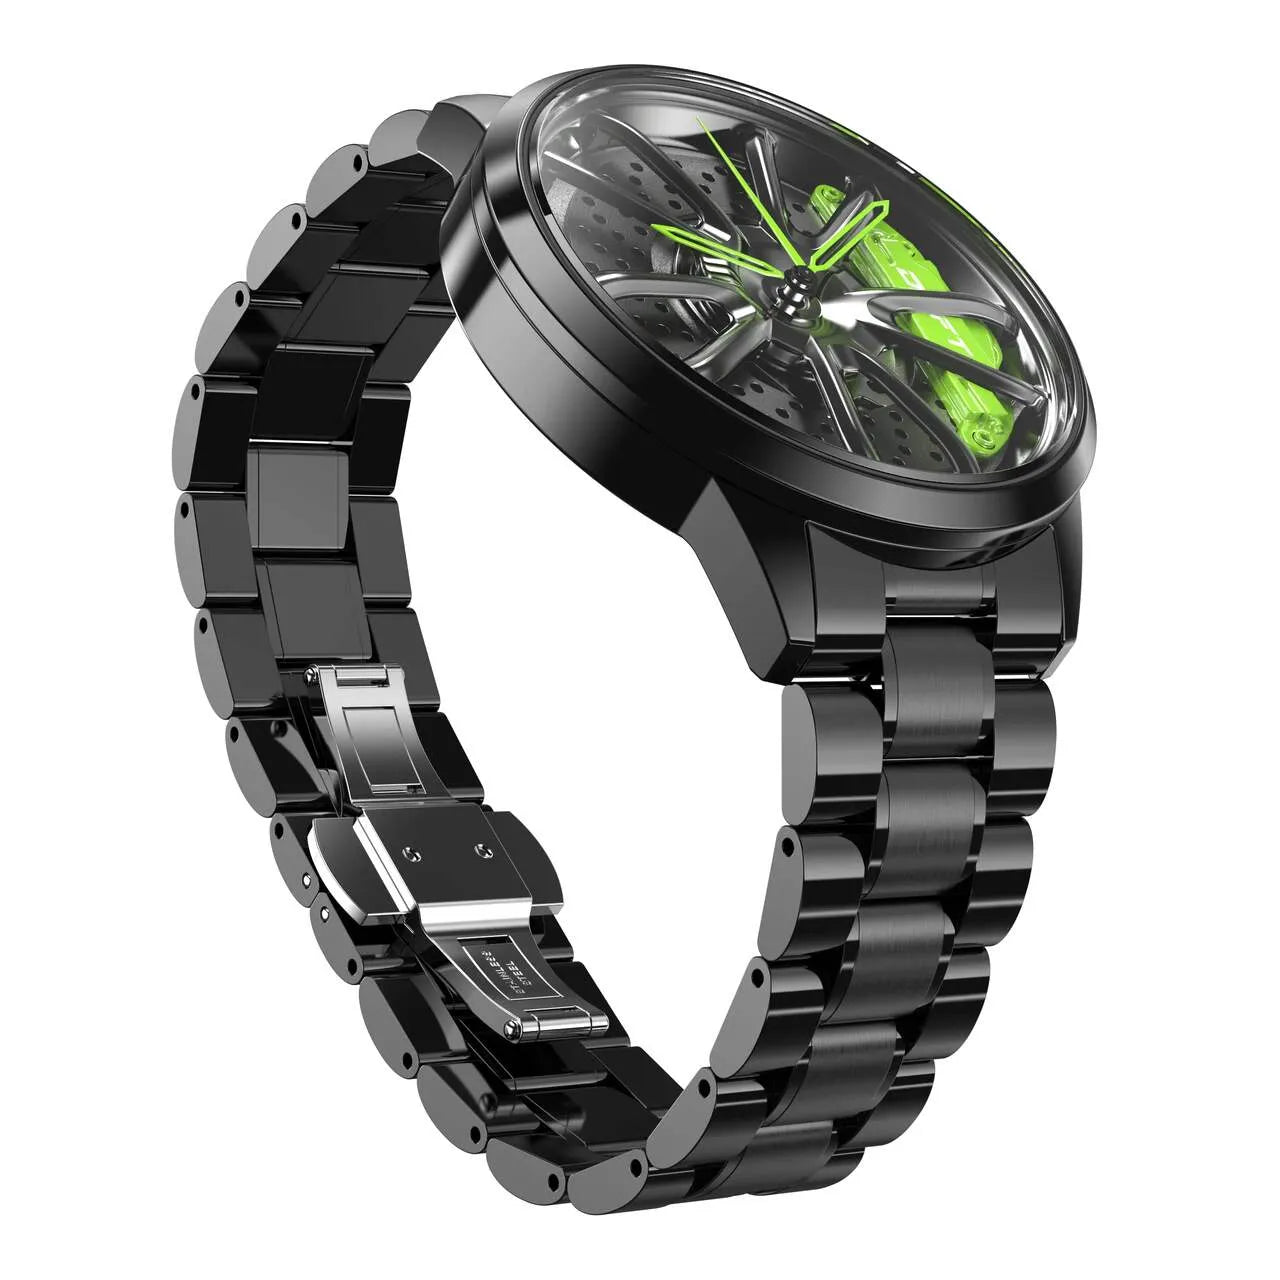 Elevate your fashion with our sleek green Performance GT Rim Watch! Precision-crafted by a German startup, these watches are designed for motorsport, tuning, and auto aficionados. Get ready to ignite your passion! #id_46744365465930